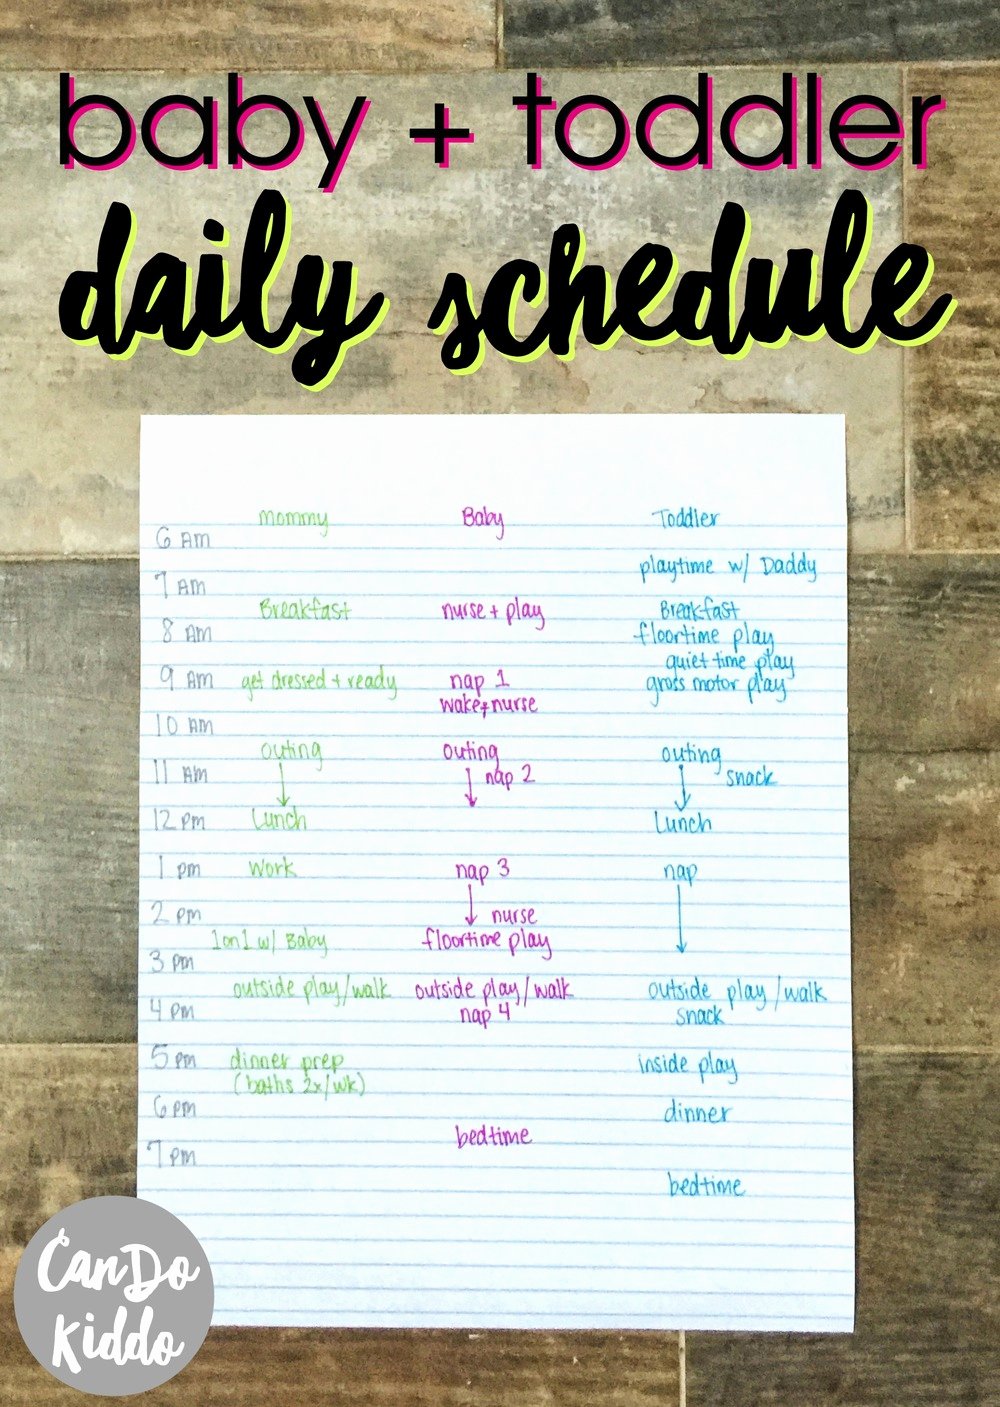 Baby Daily Schedule Template Inspirational My Stay at Home Infant and toddler Schedule — Cando Kiddo